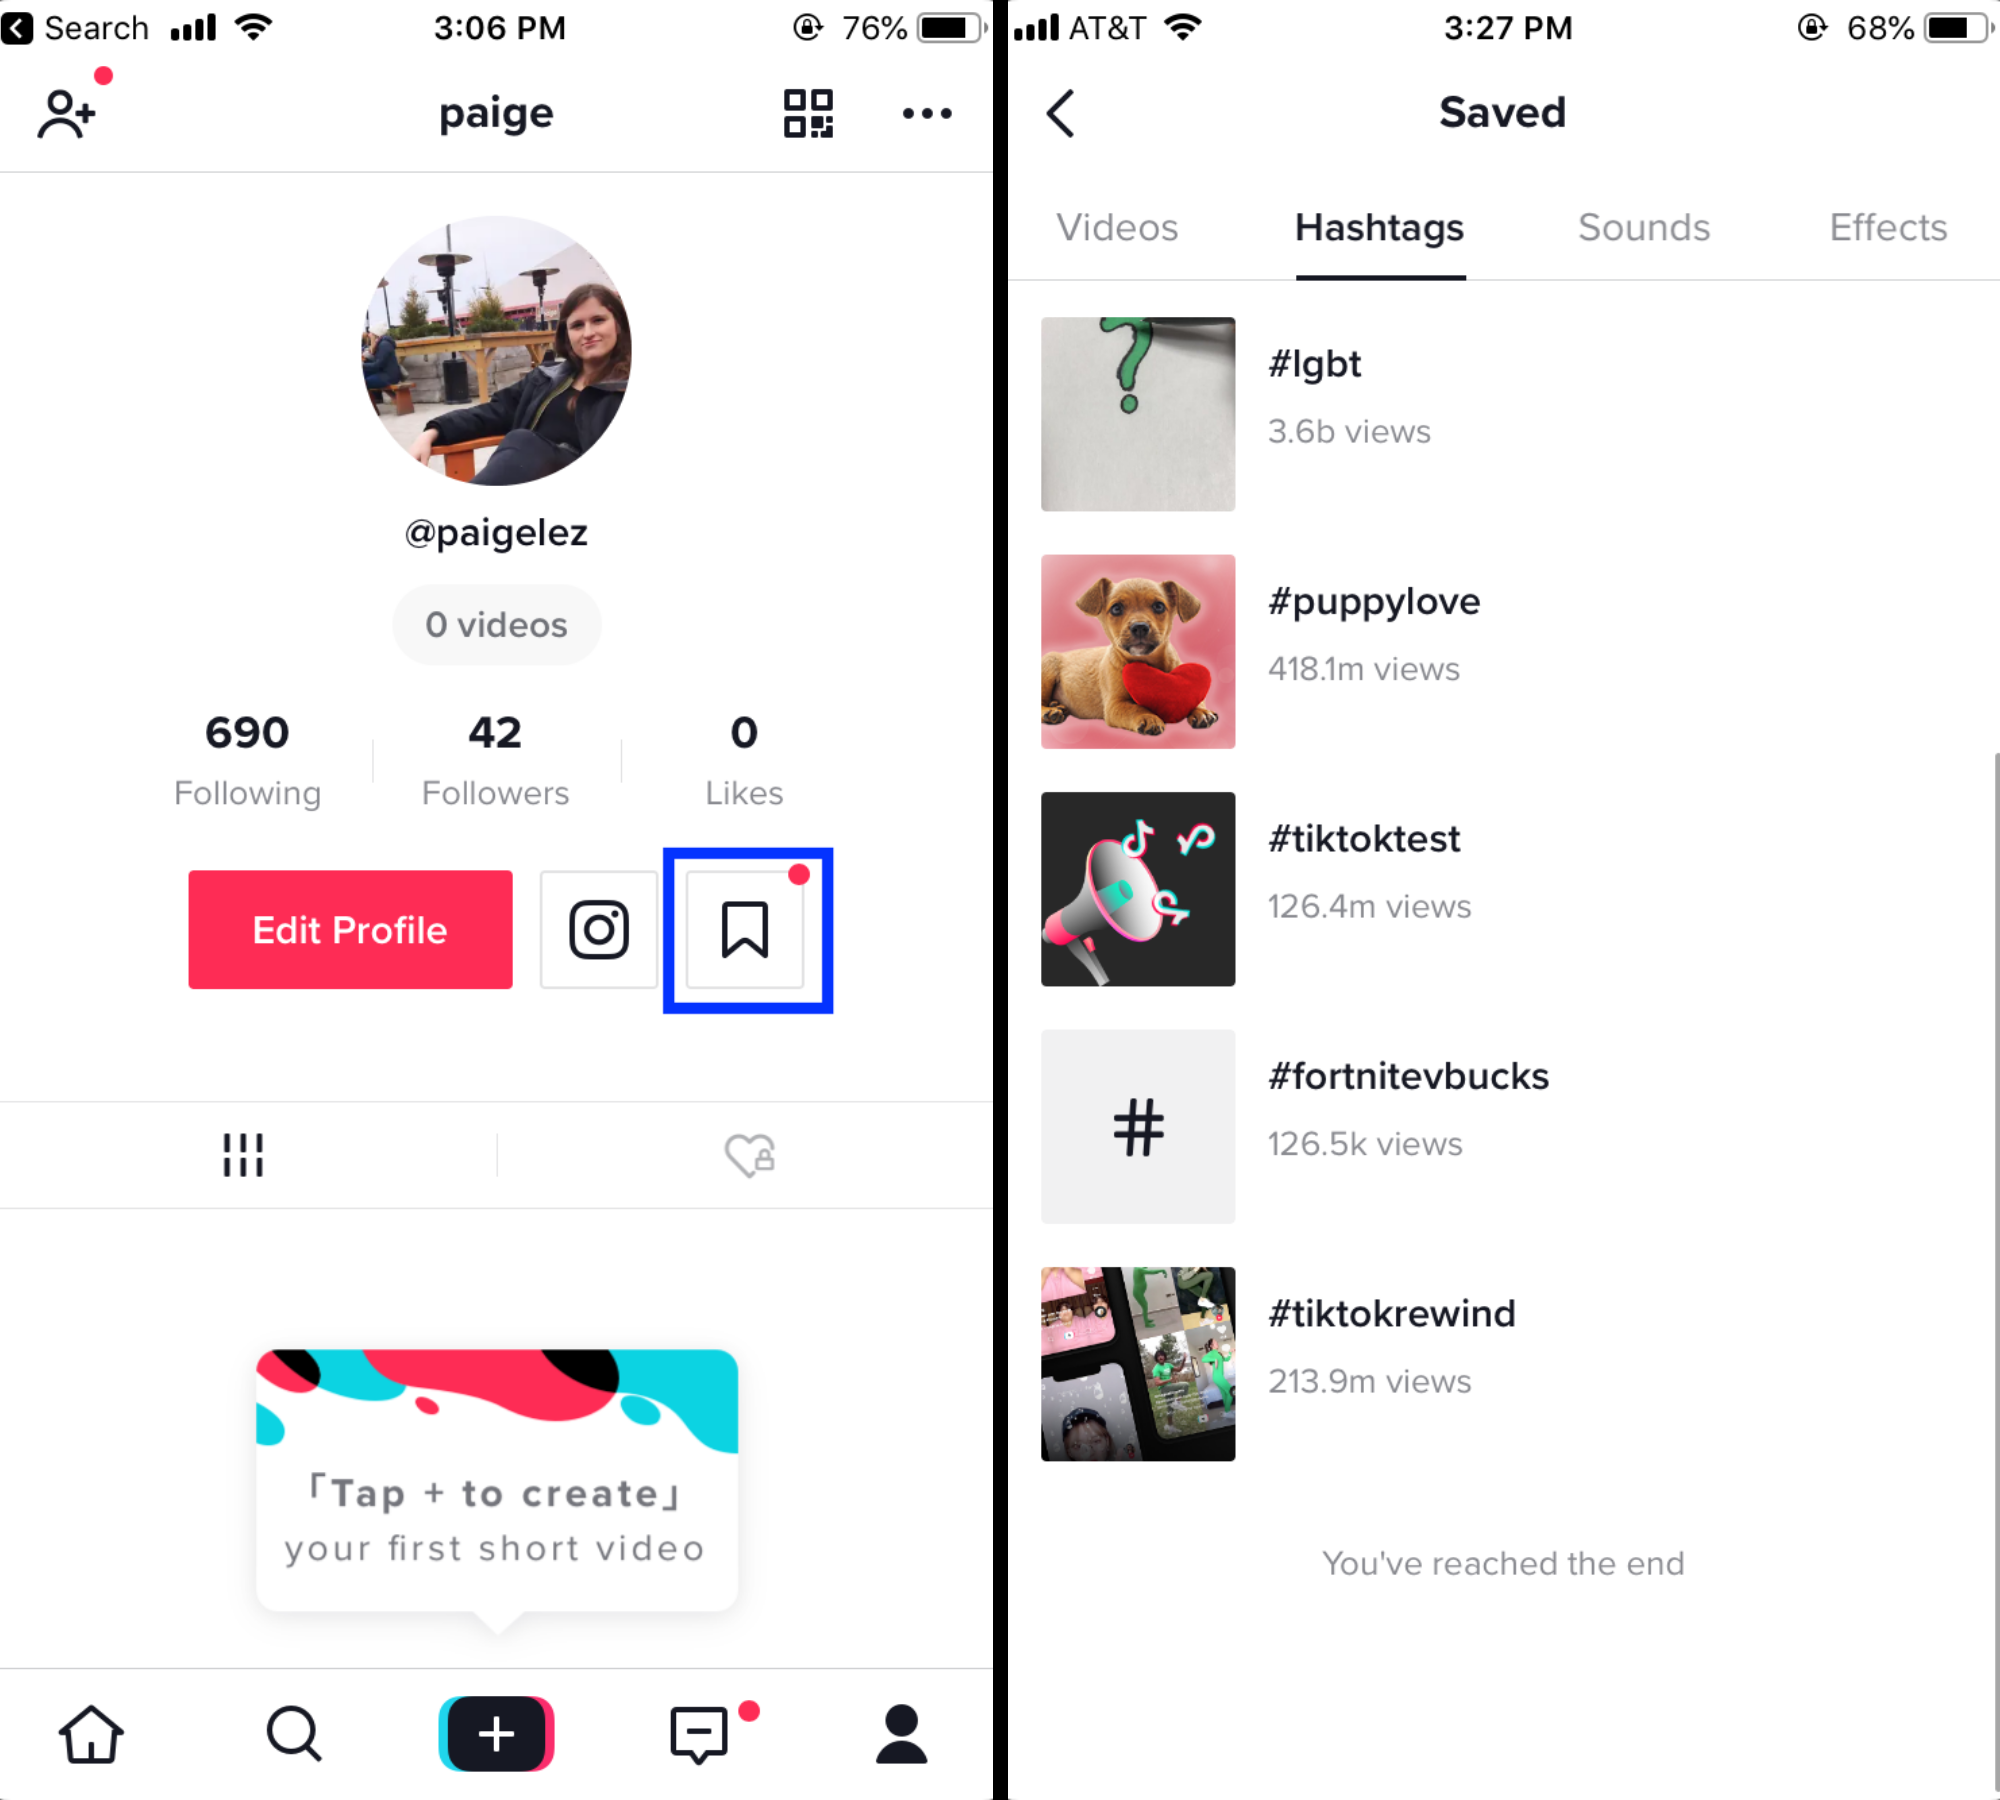 All of the content that you save on TikTok — videos, hashtags, sounds ...